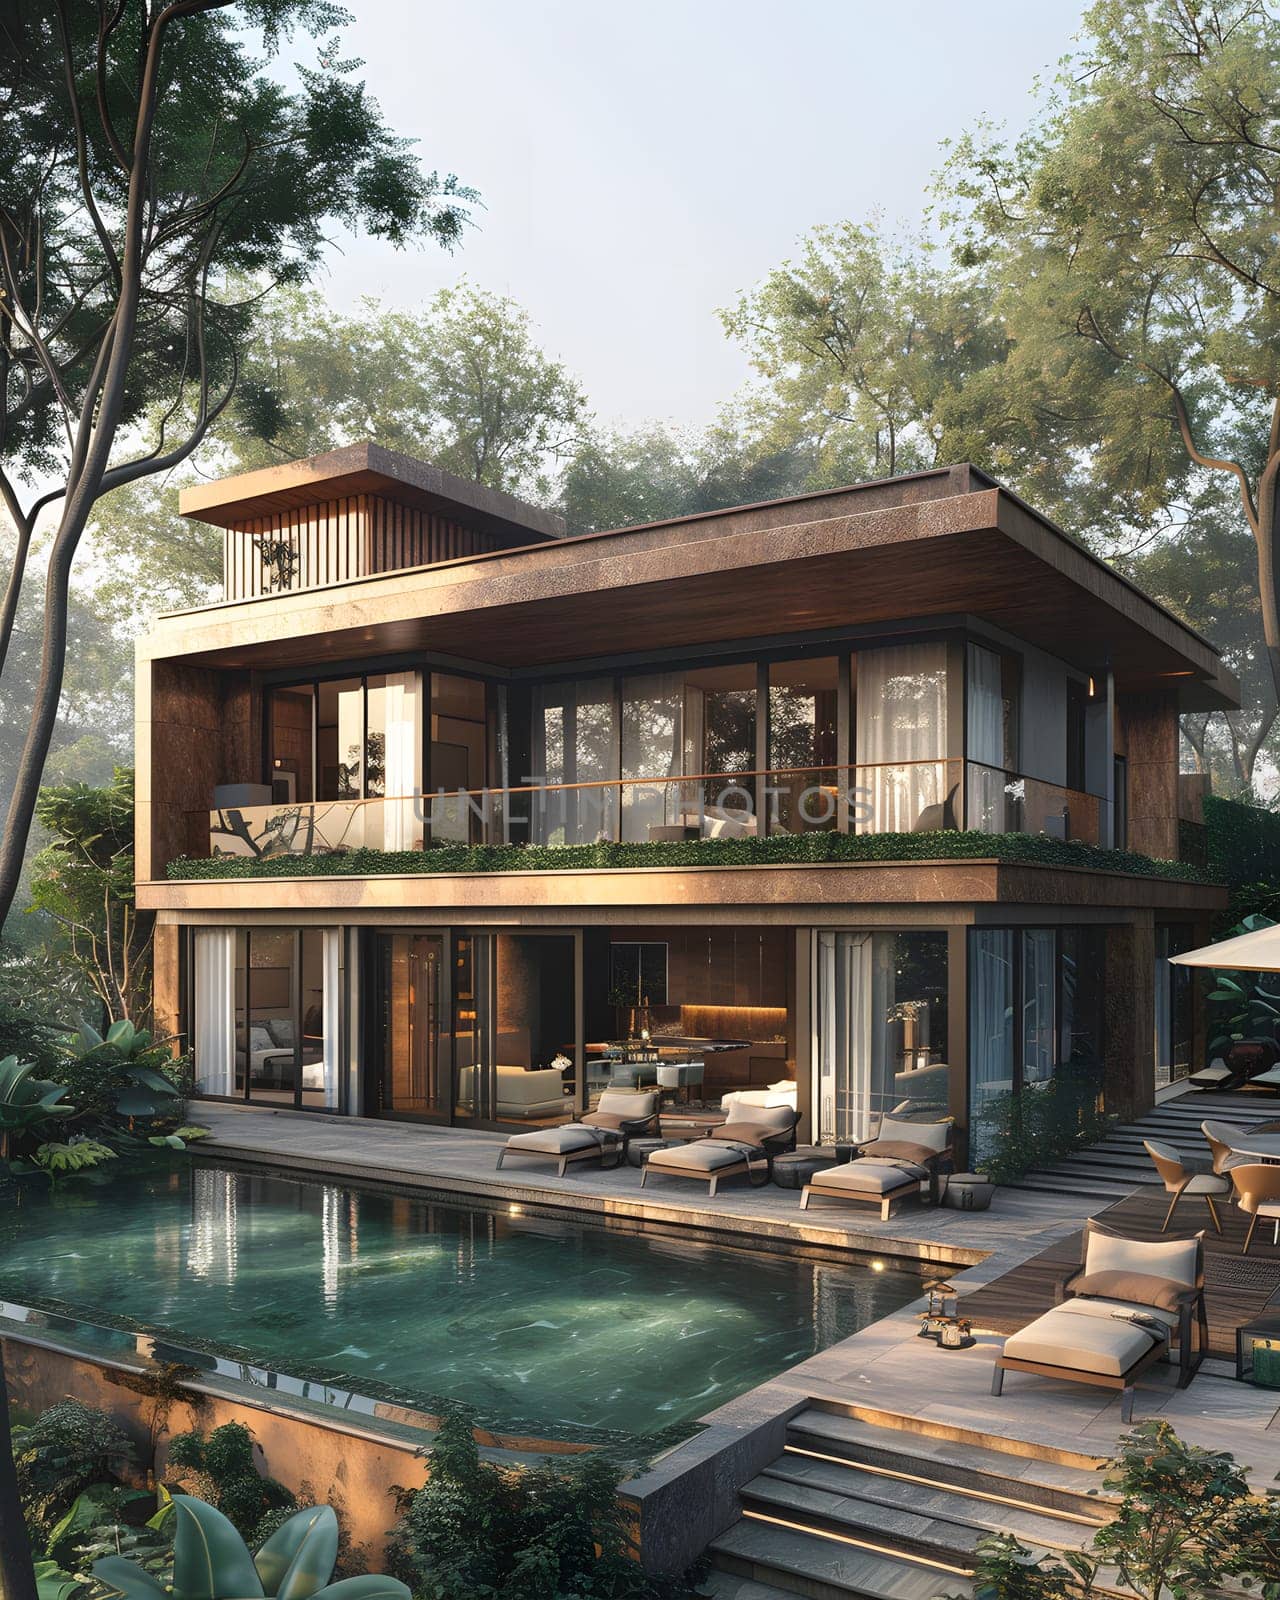 A spacious residential building with a swimming pool set amidst lush trees. The house boasts large windows, wooden accents, and offers a leisurely escape